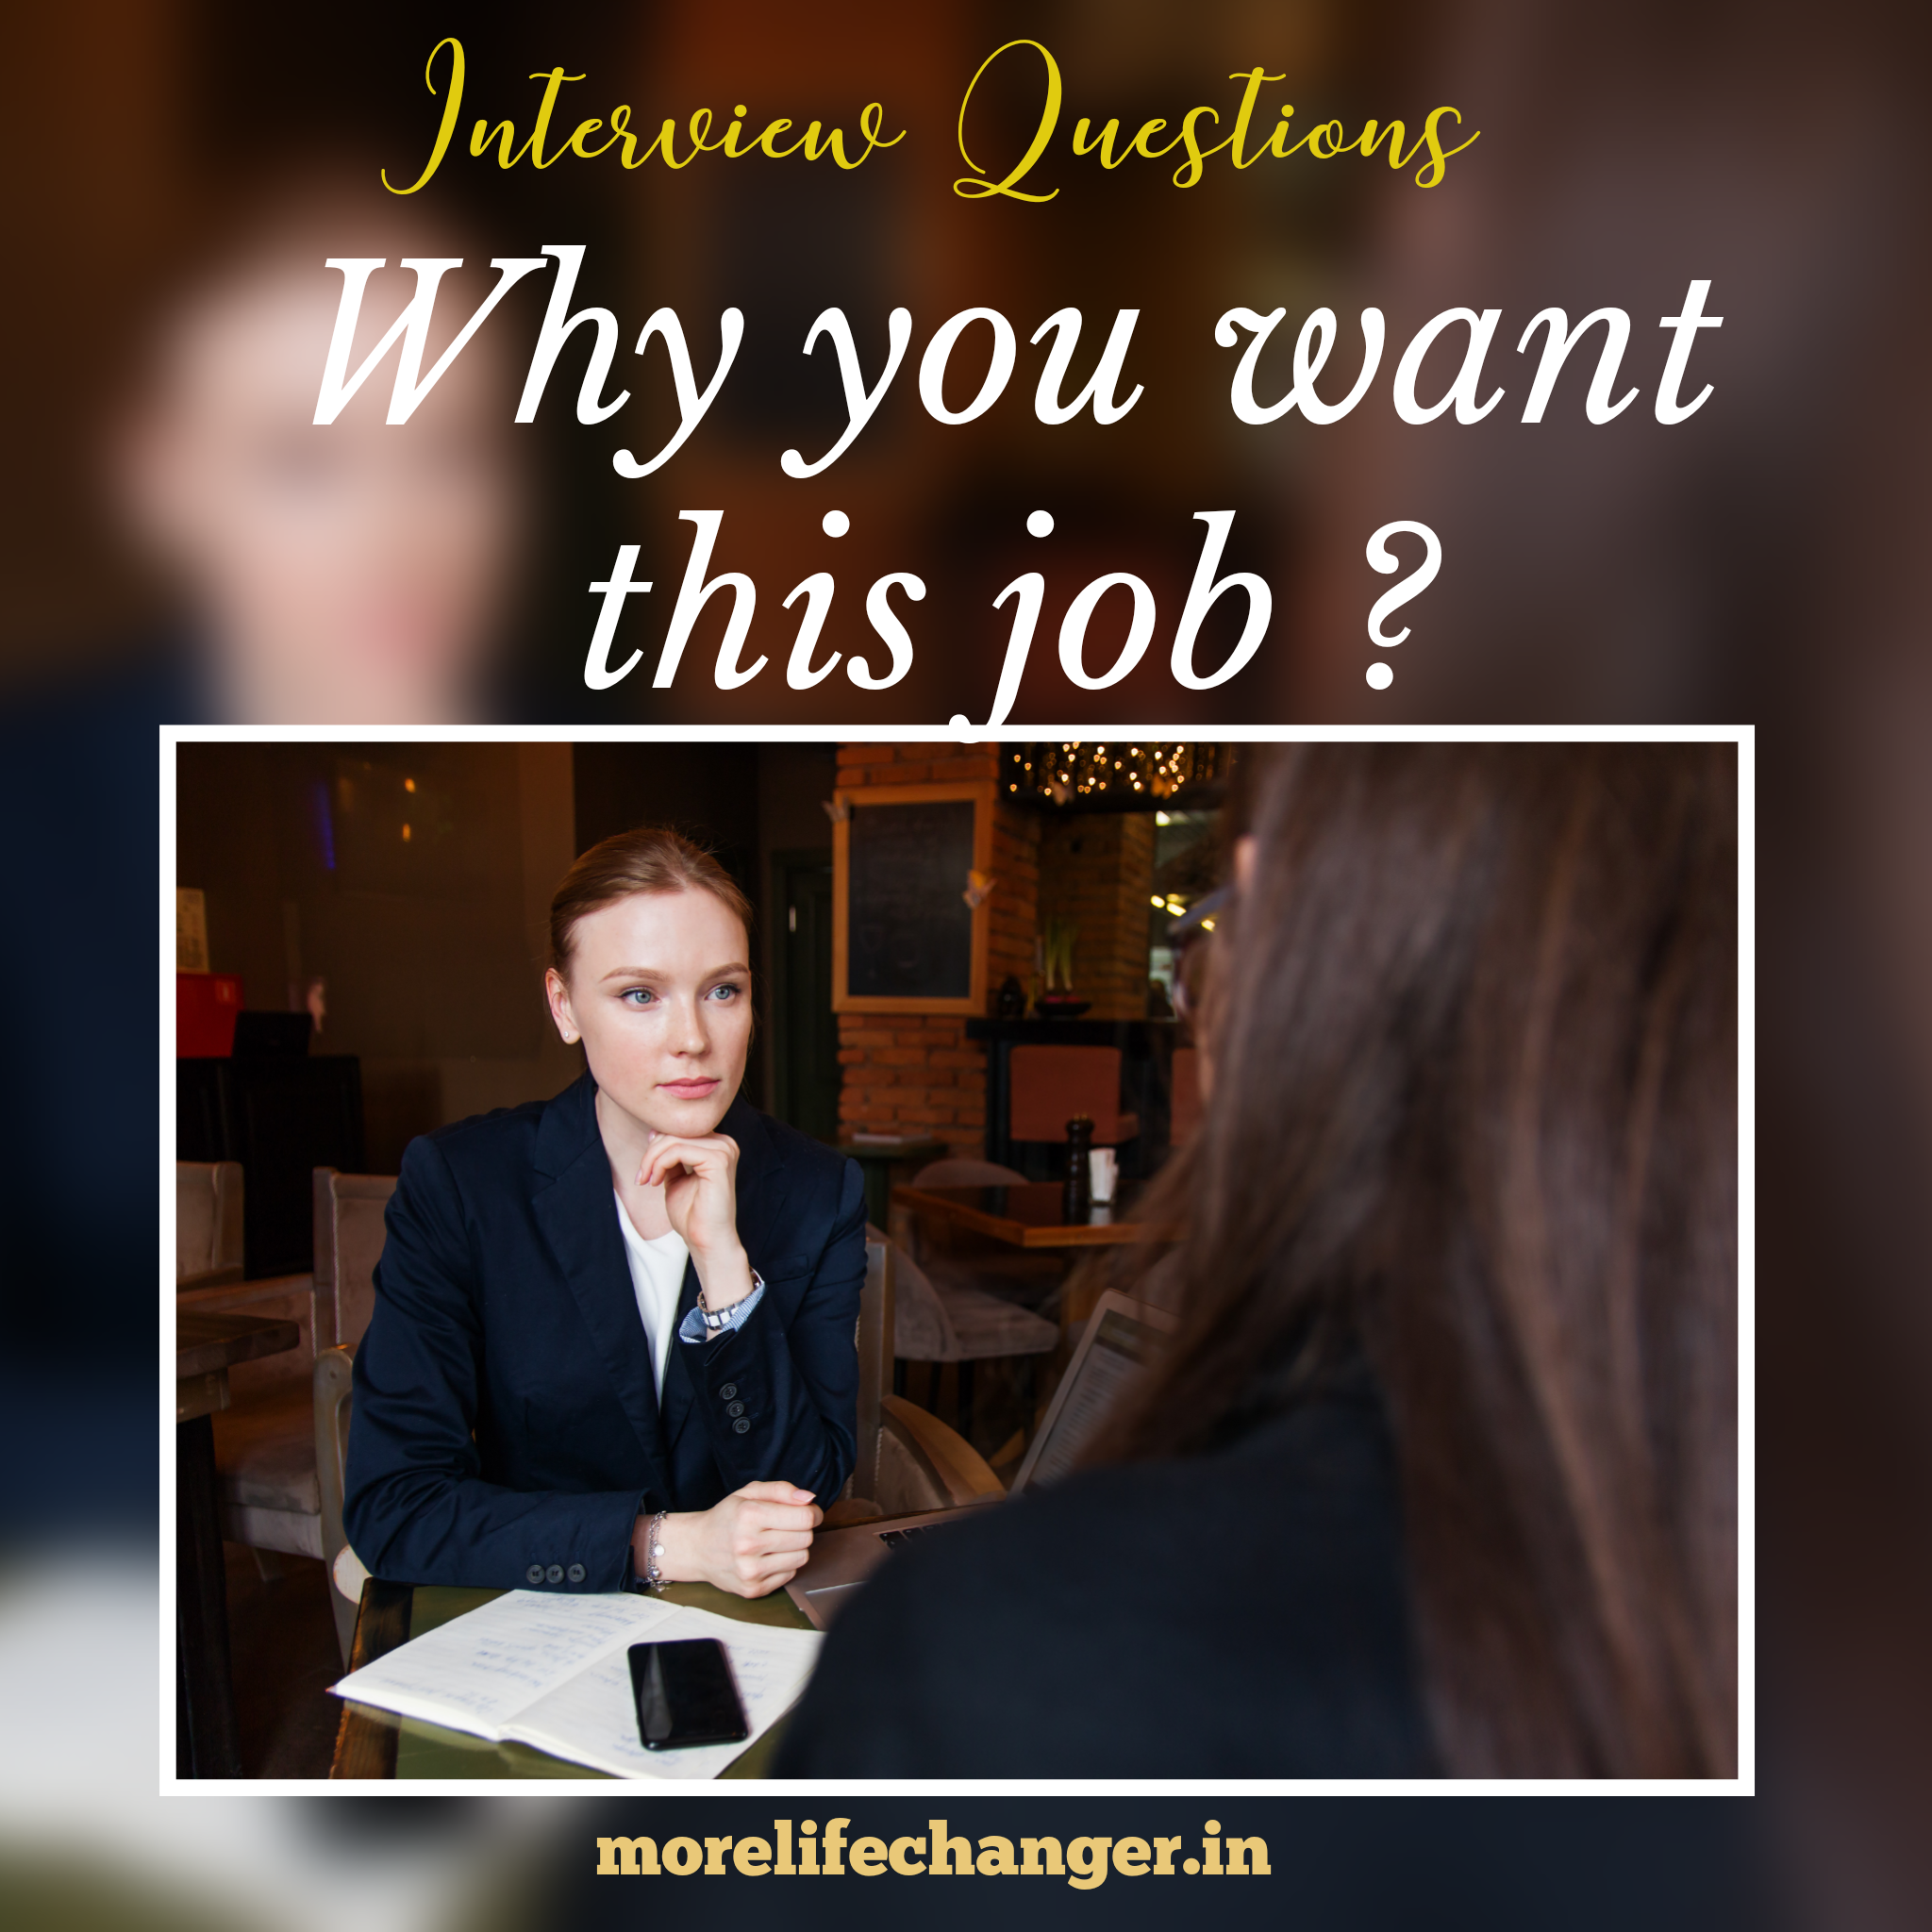 story- Why do you want this job